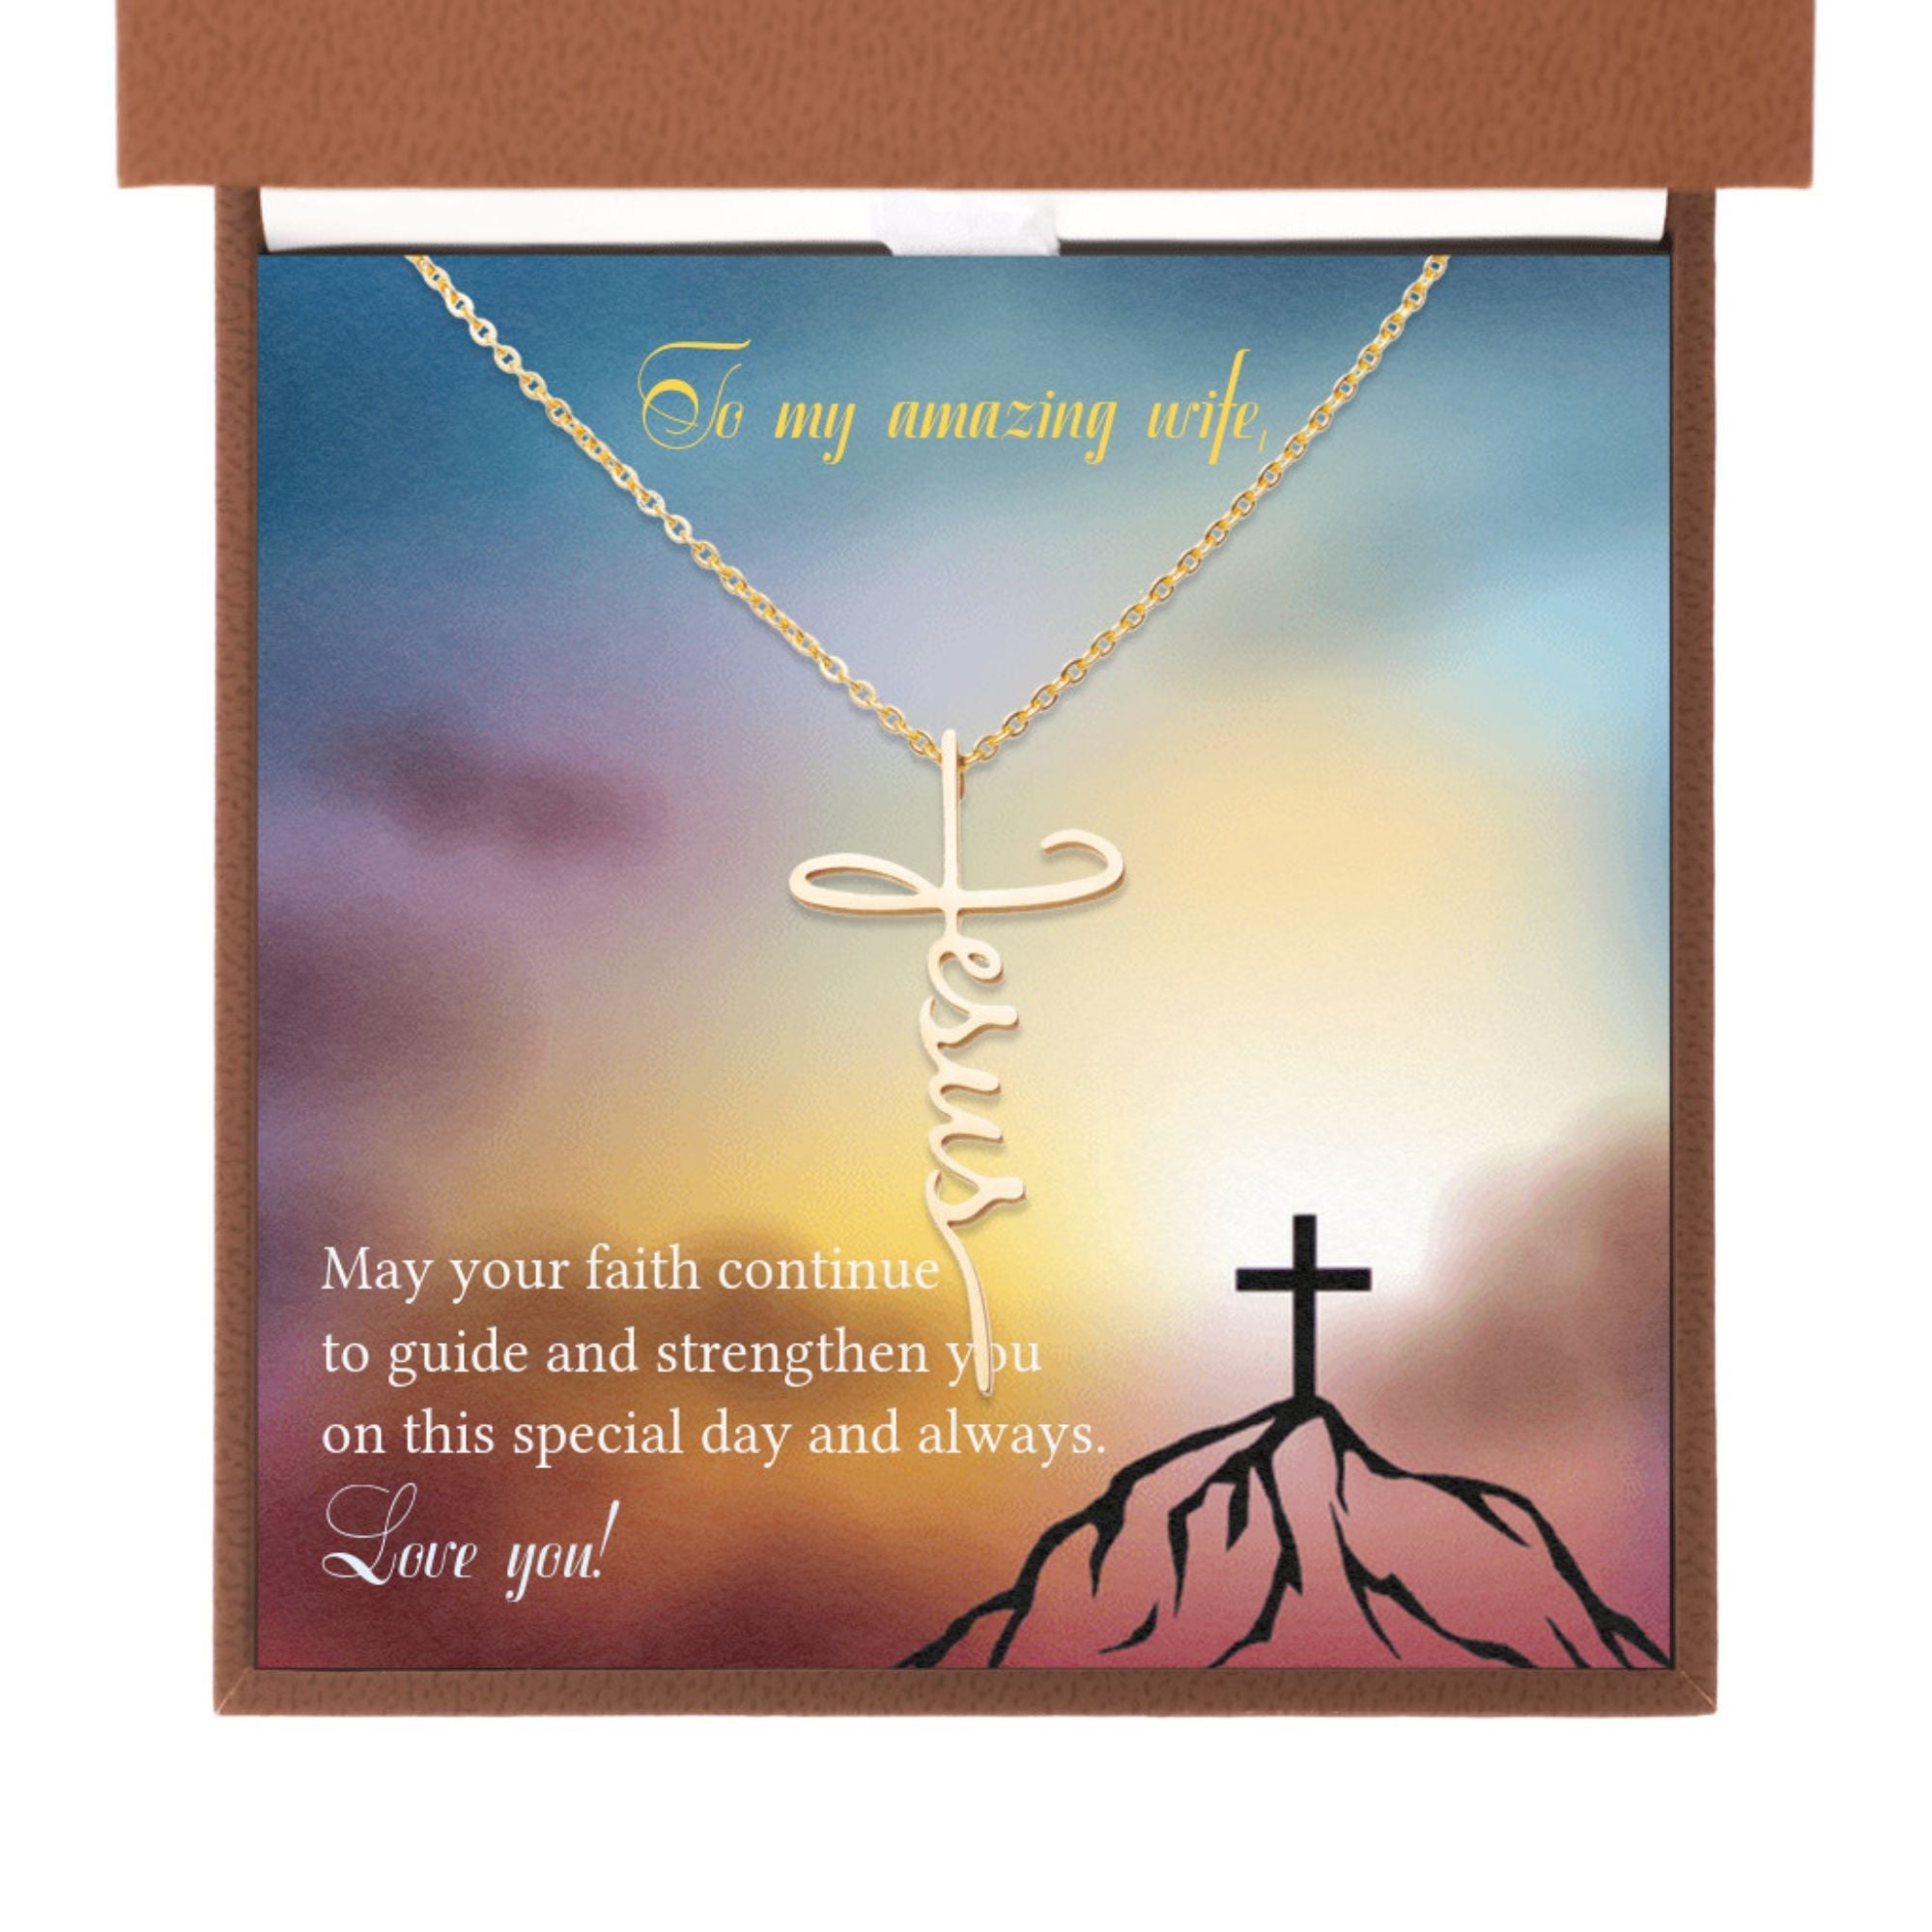 My Amazing Wife - I Am the Way - Jesus Cross Necklace Box Type: Brown Leather Box Finish: 18K Gold Plated Jesus Passion Apparel